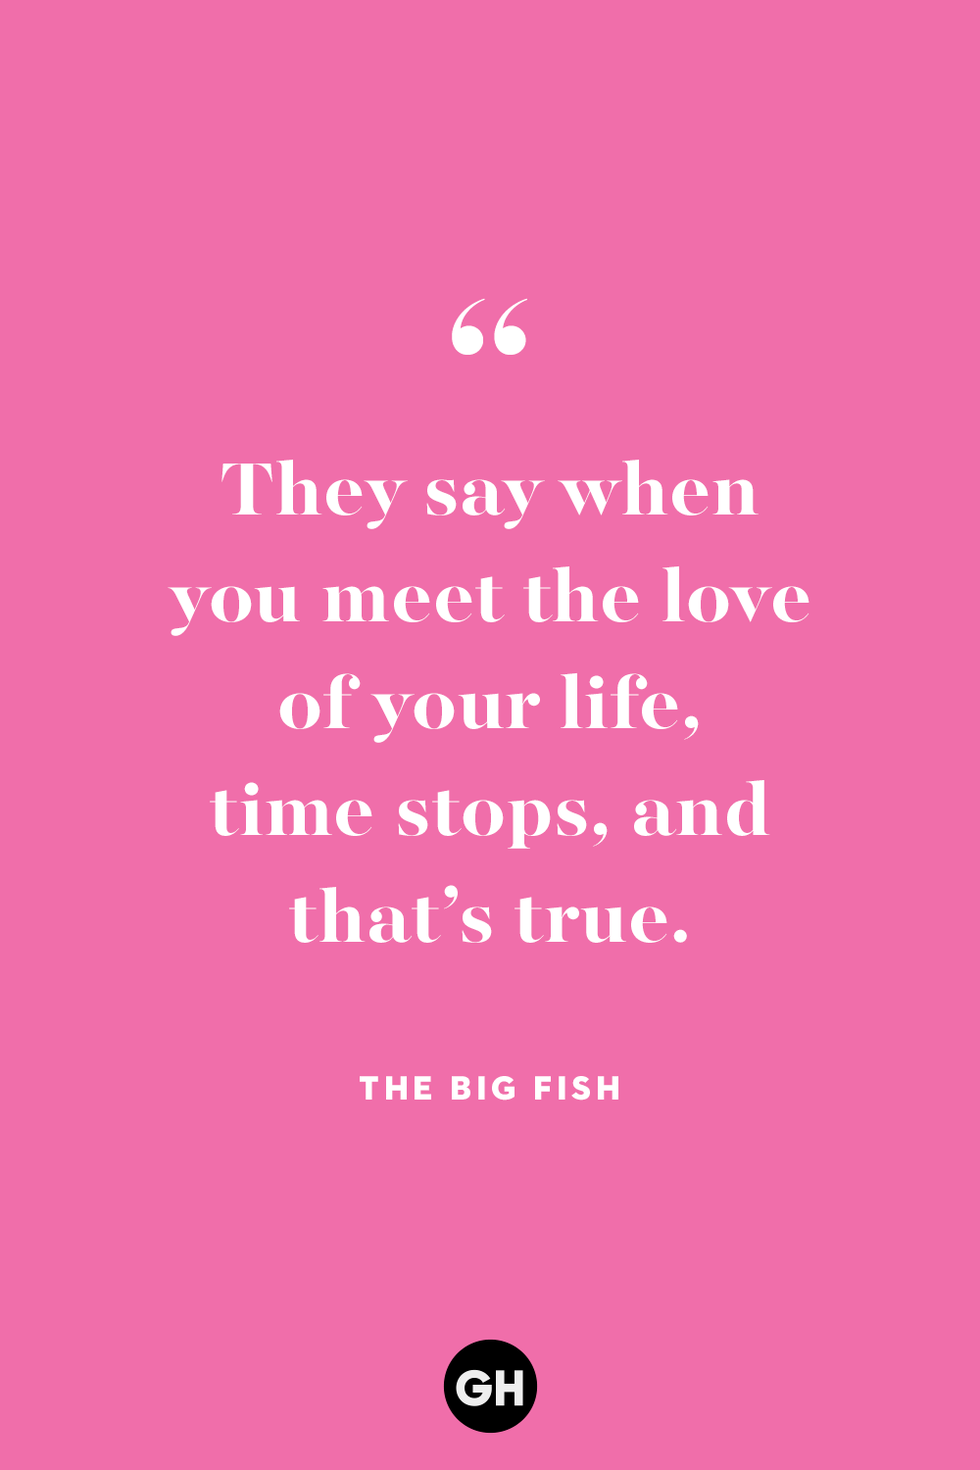 50 True Love Quotes Messages For Sweet And Eternal Relationship